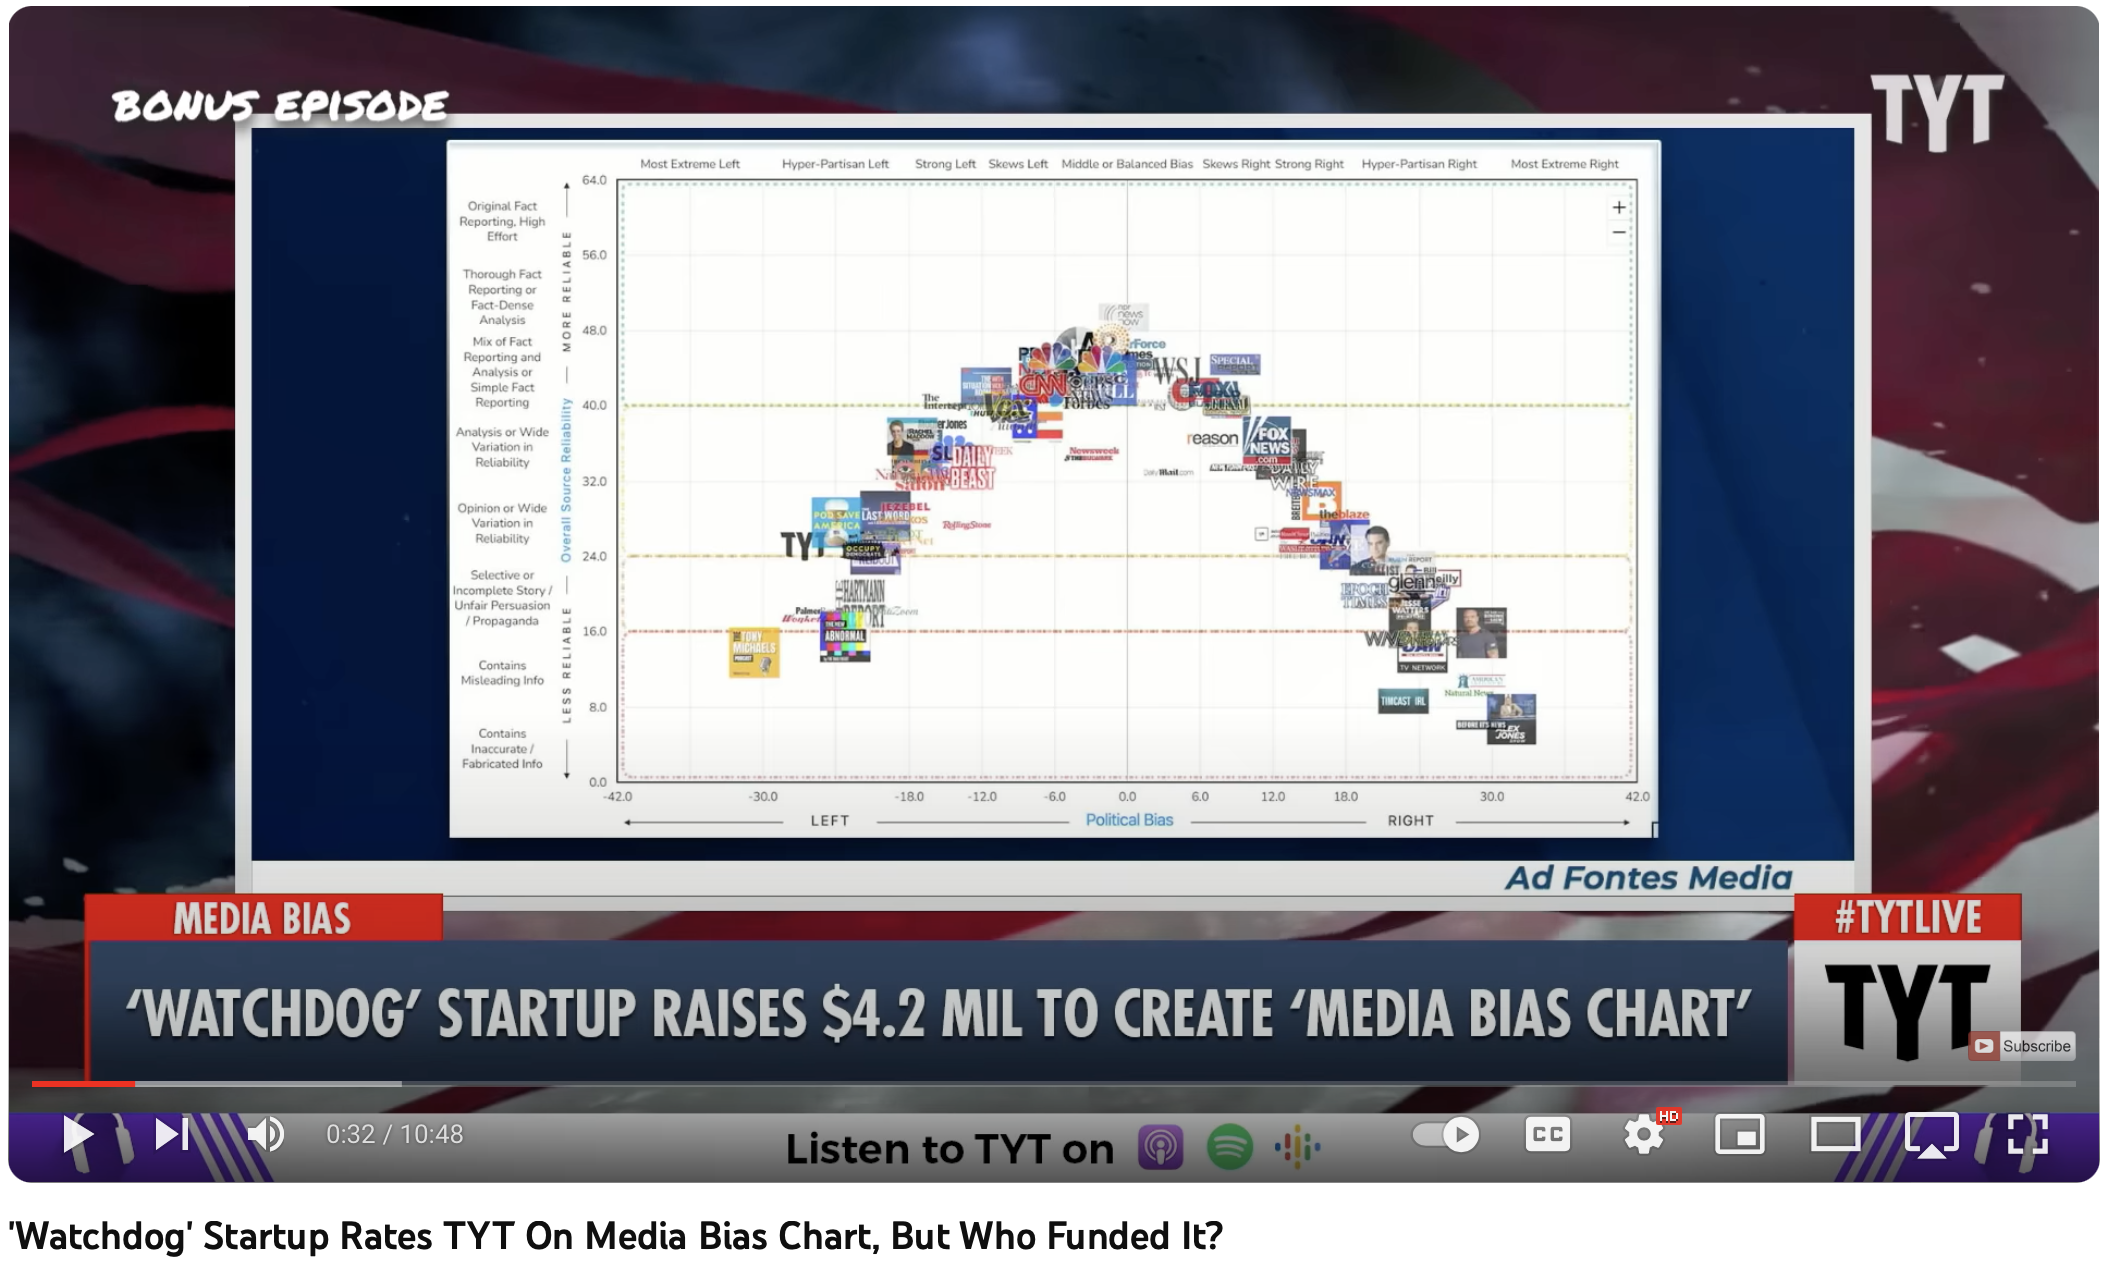 What the TYT Critique Misses About the Media Bias Chart